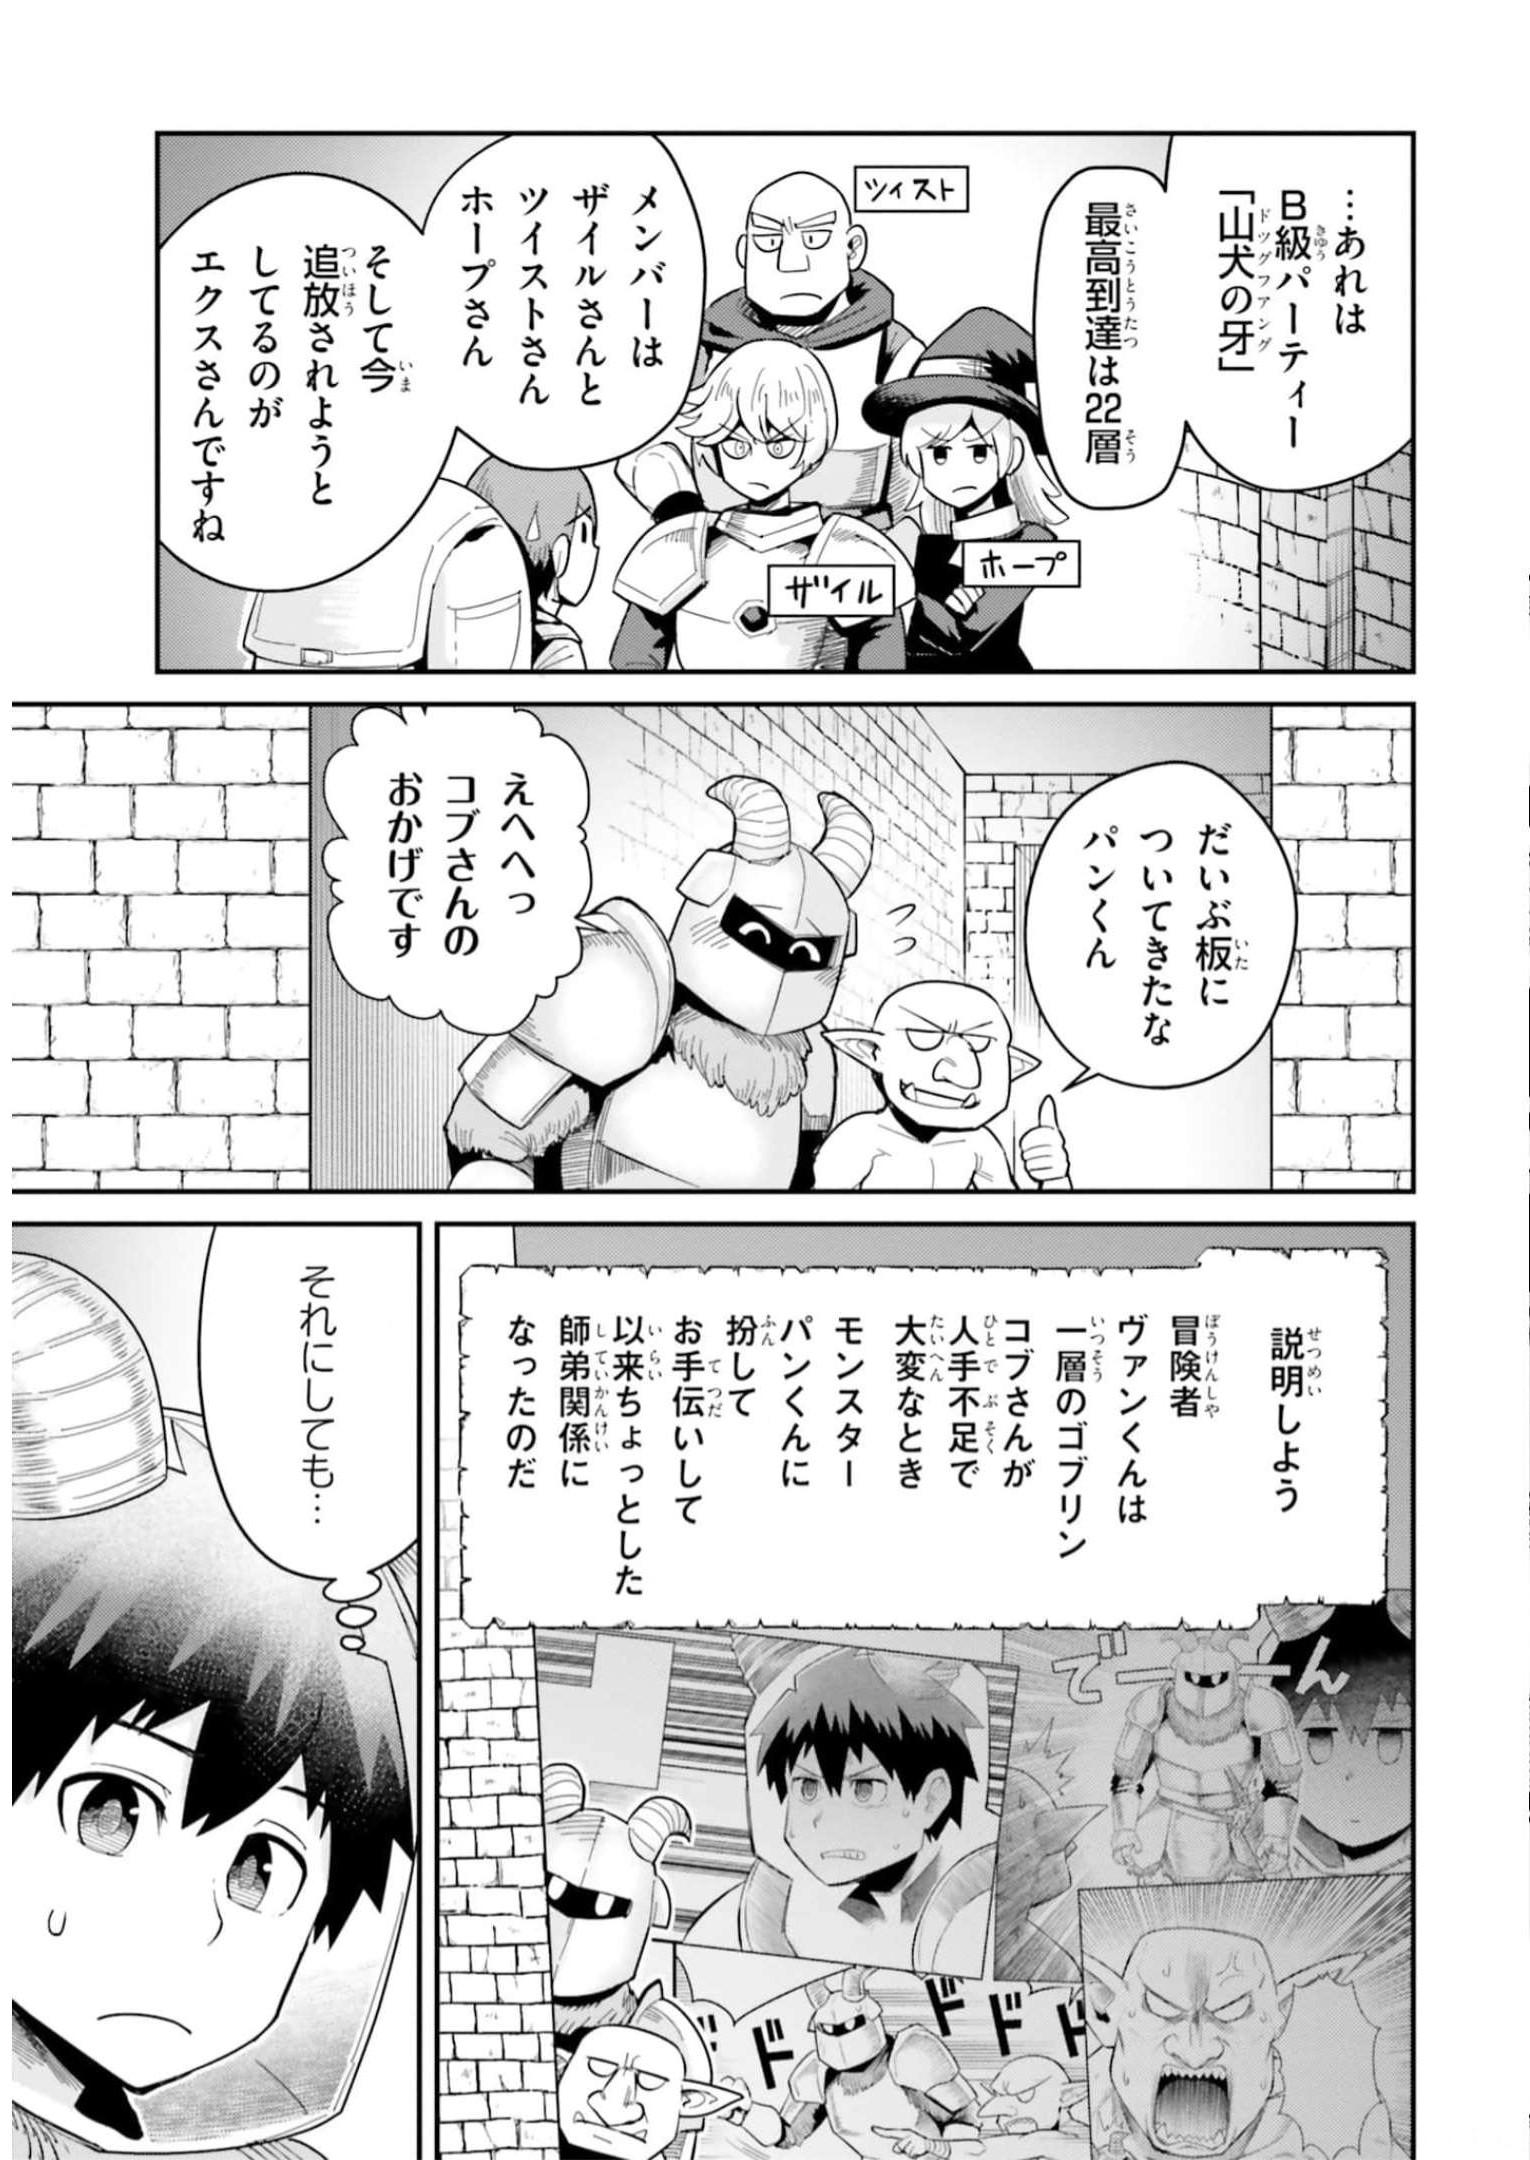 Dungeon Friends Forever Dungeon's Childhood Friend ダンジョンの幼なじみ 第25話 - Page 3